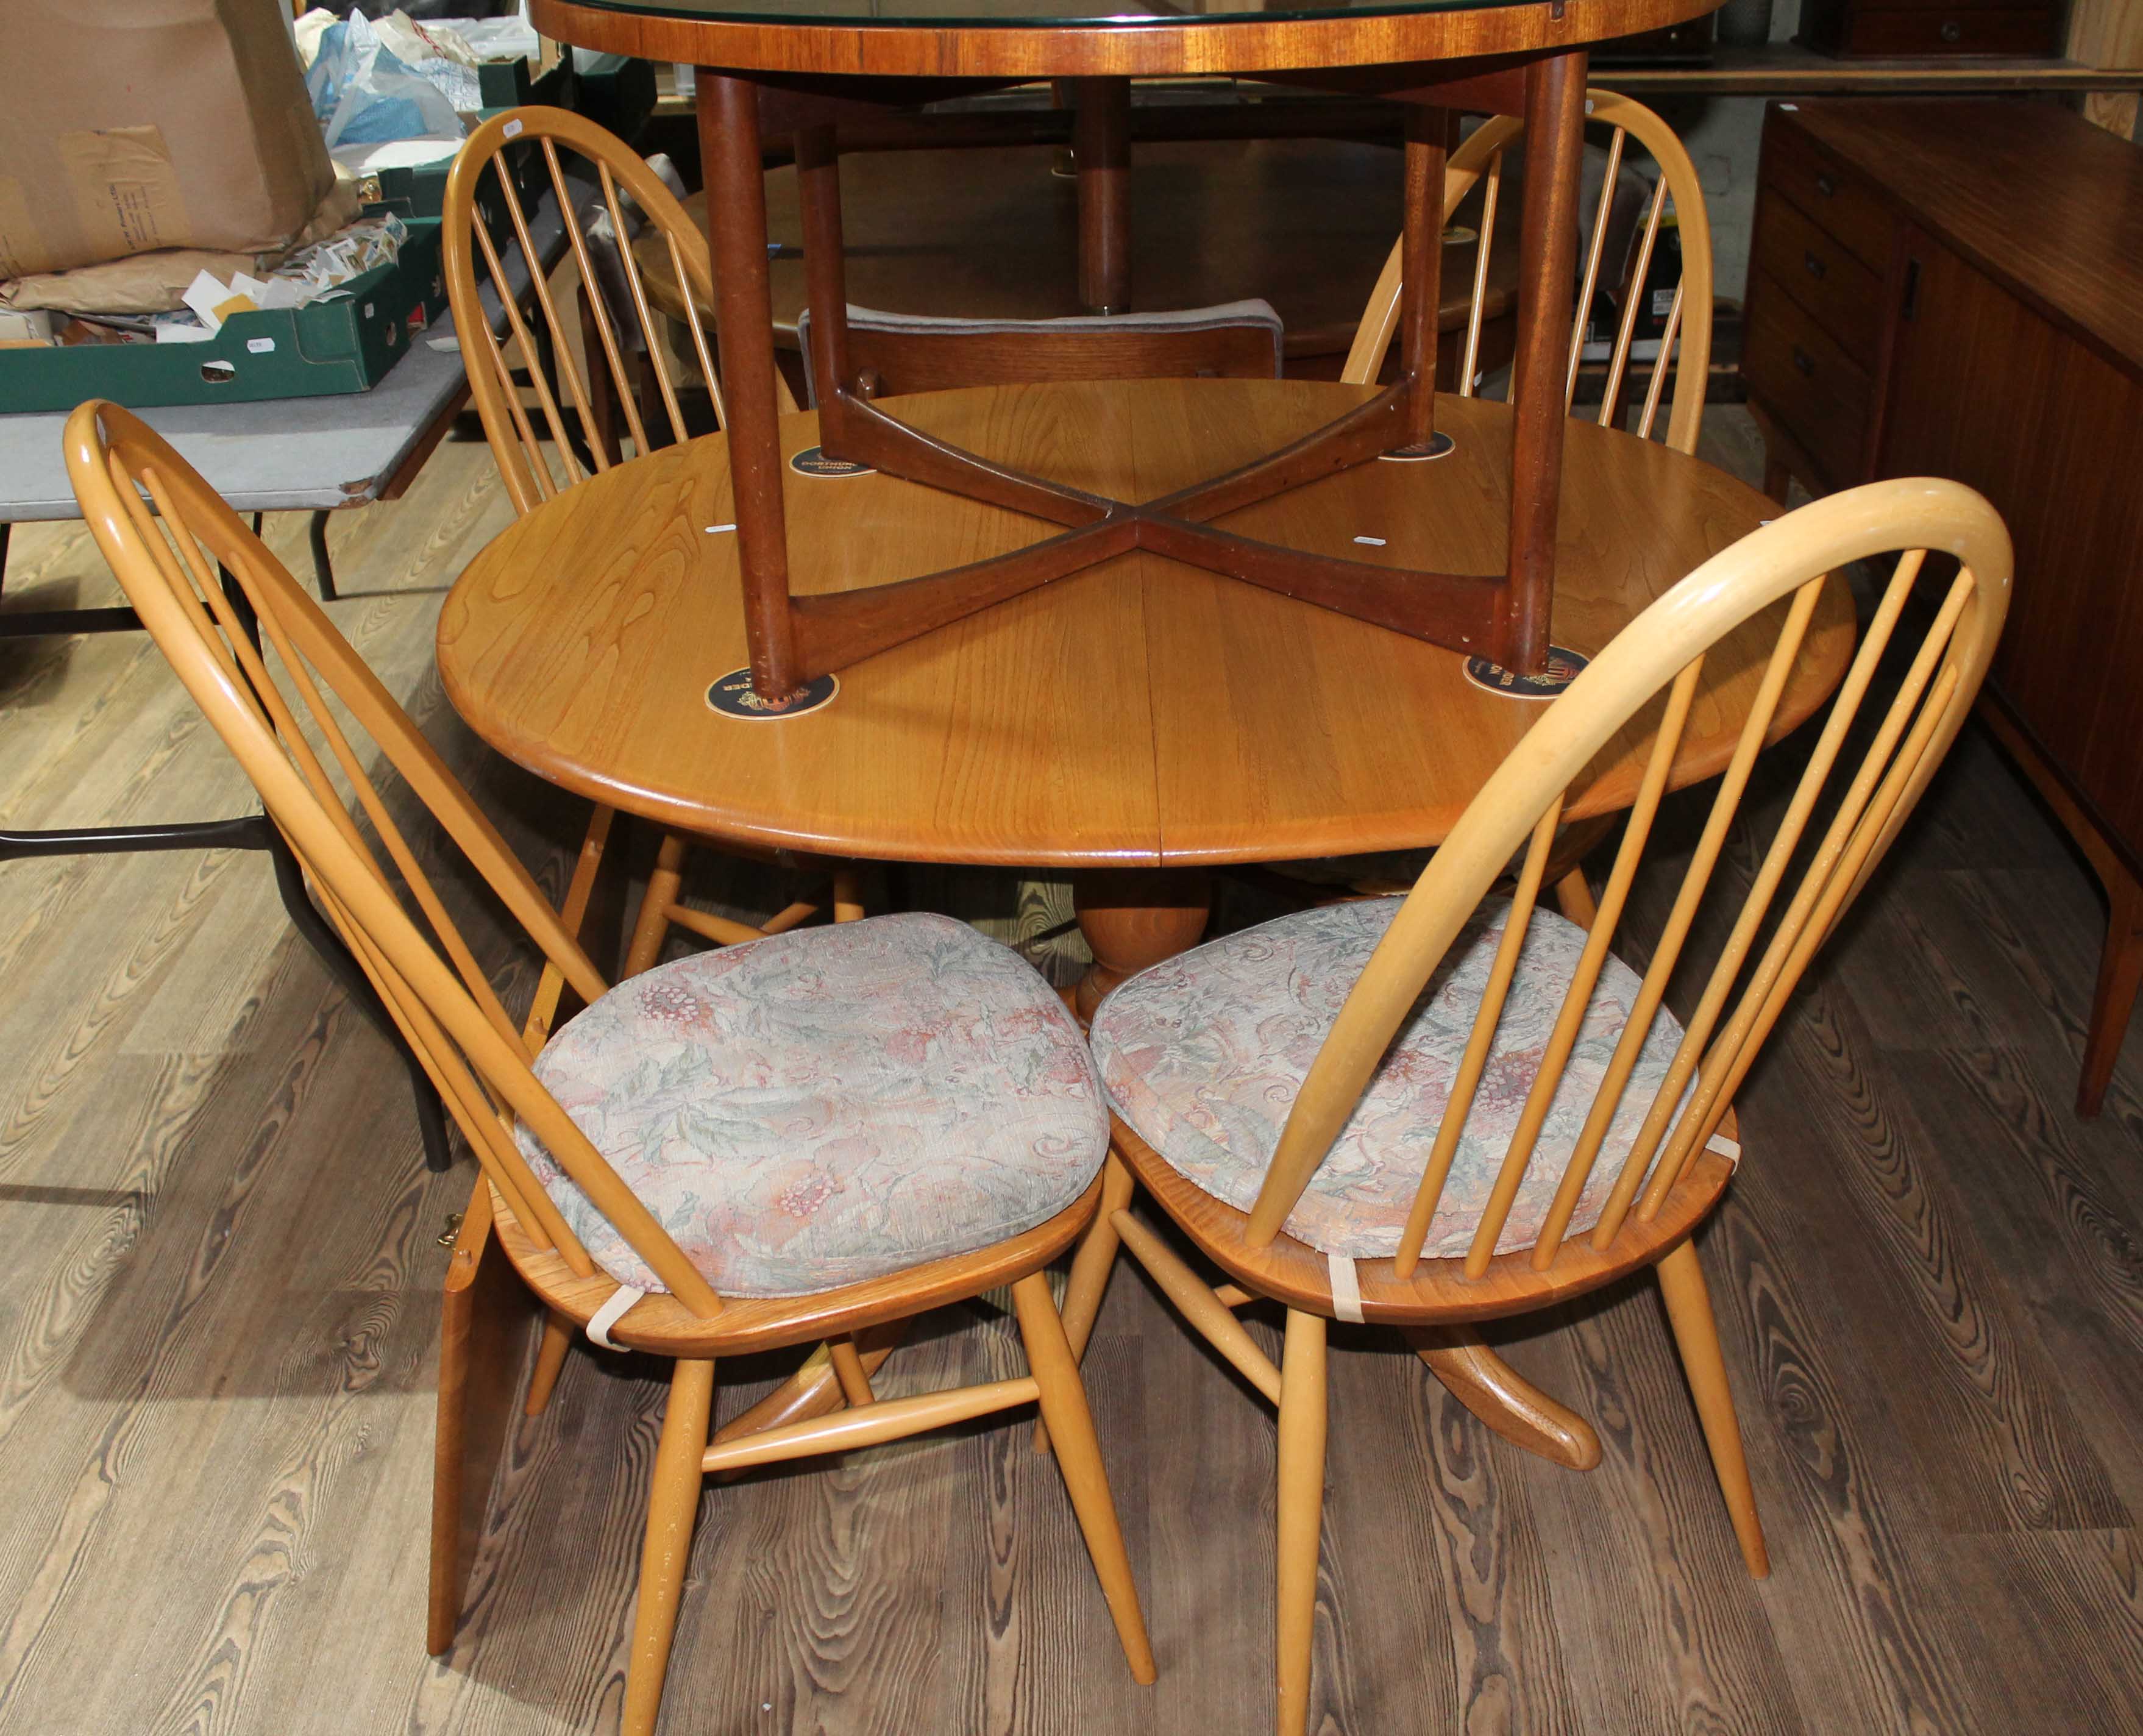 An Ercol oval extending pedestal table and four chairs, with one extension leaf.